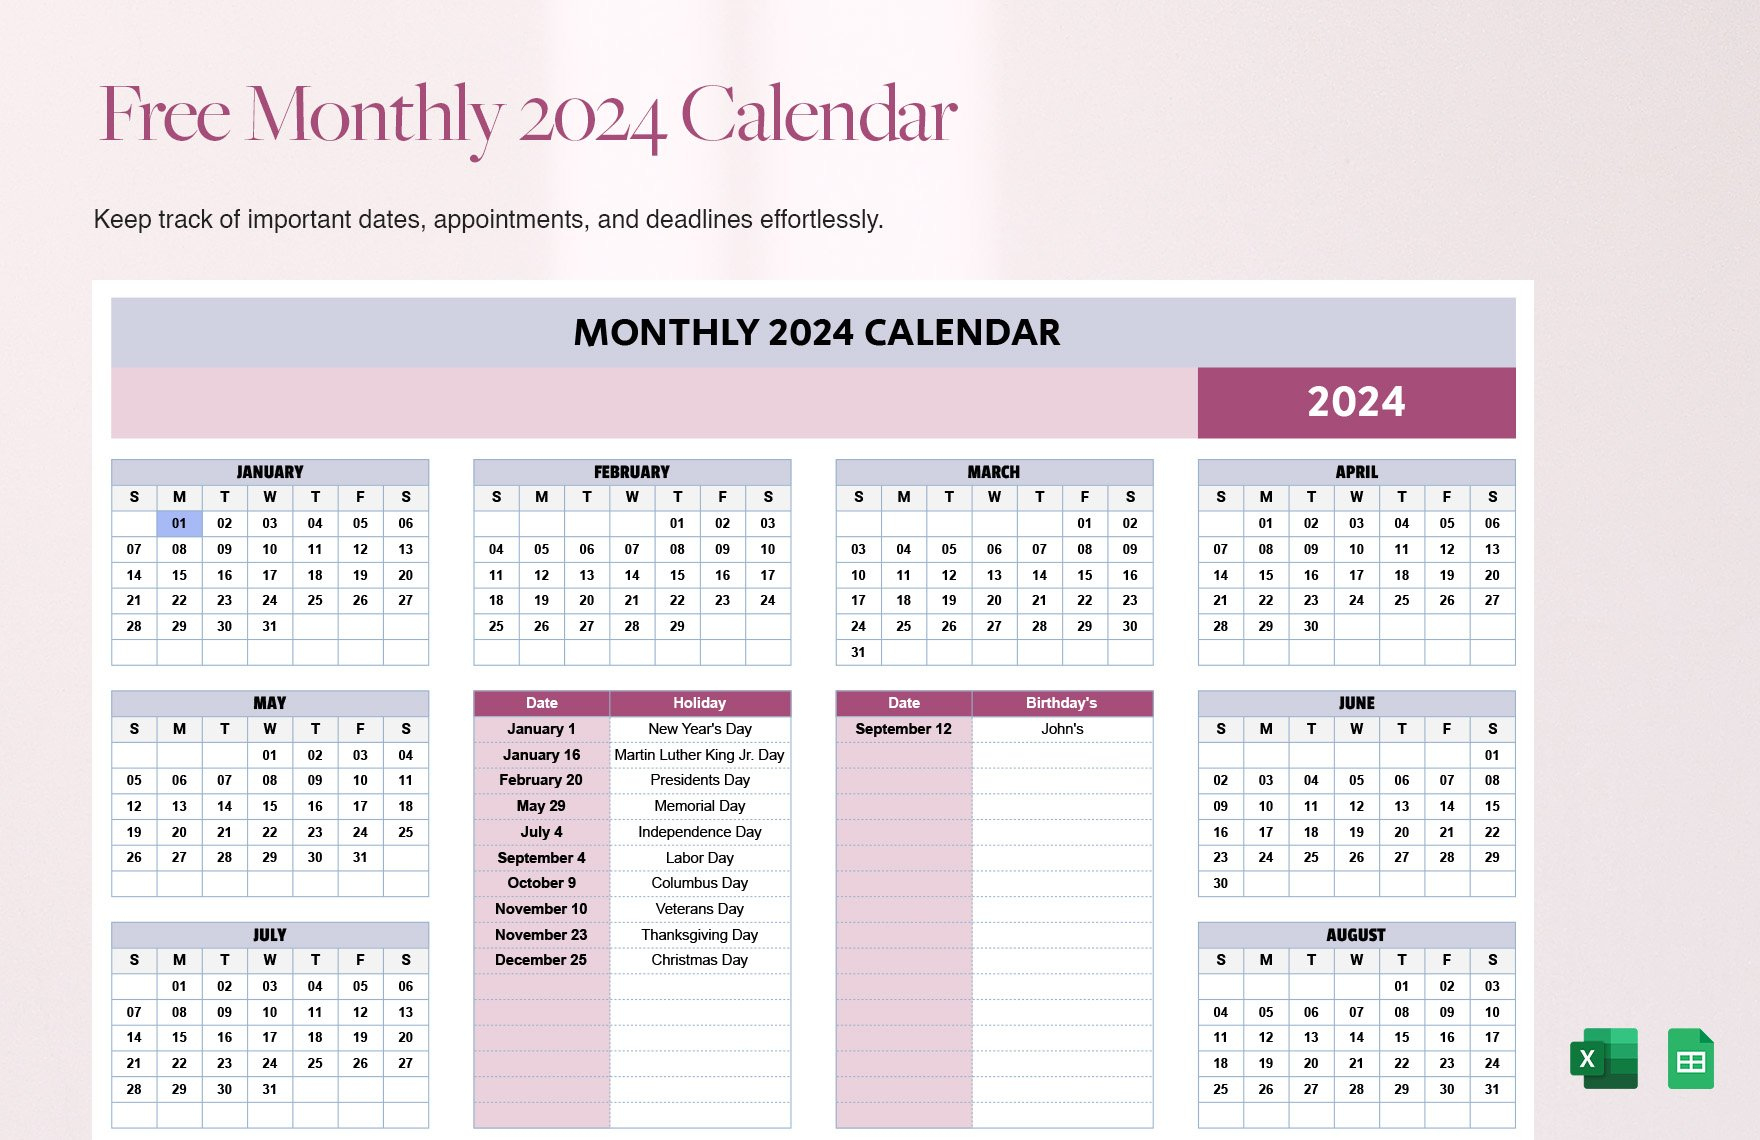 Free Monthly 2024 Calendar Template - Download In Excel, Google | Printable Calendar 2024 Monthly Excel